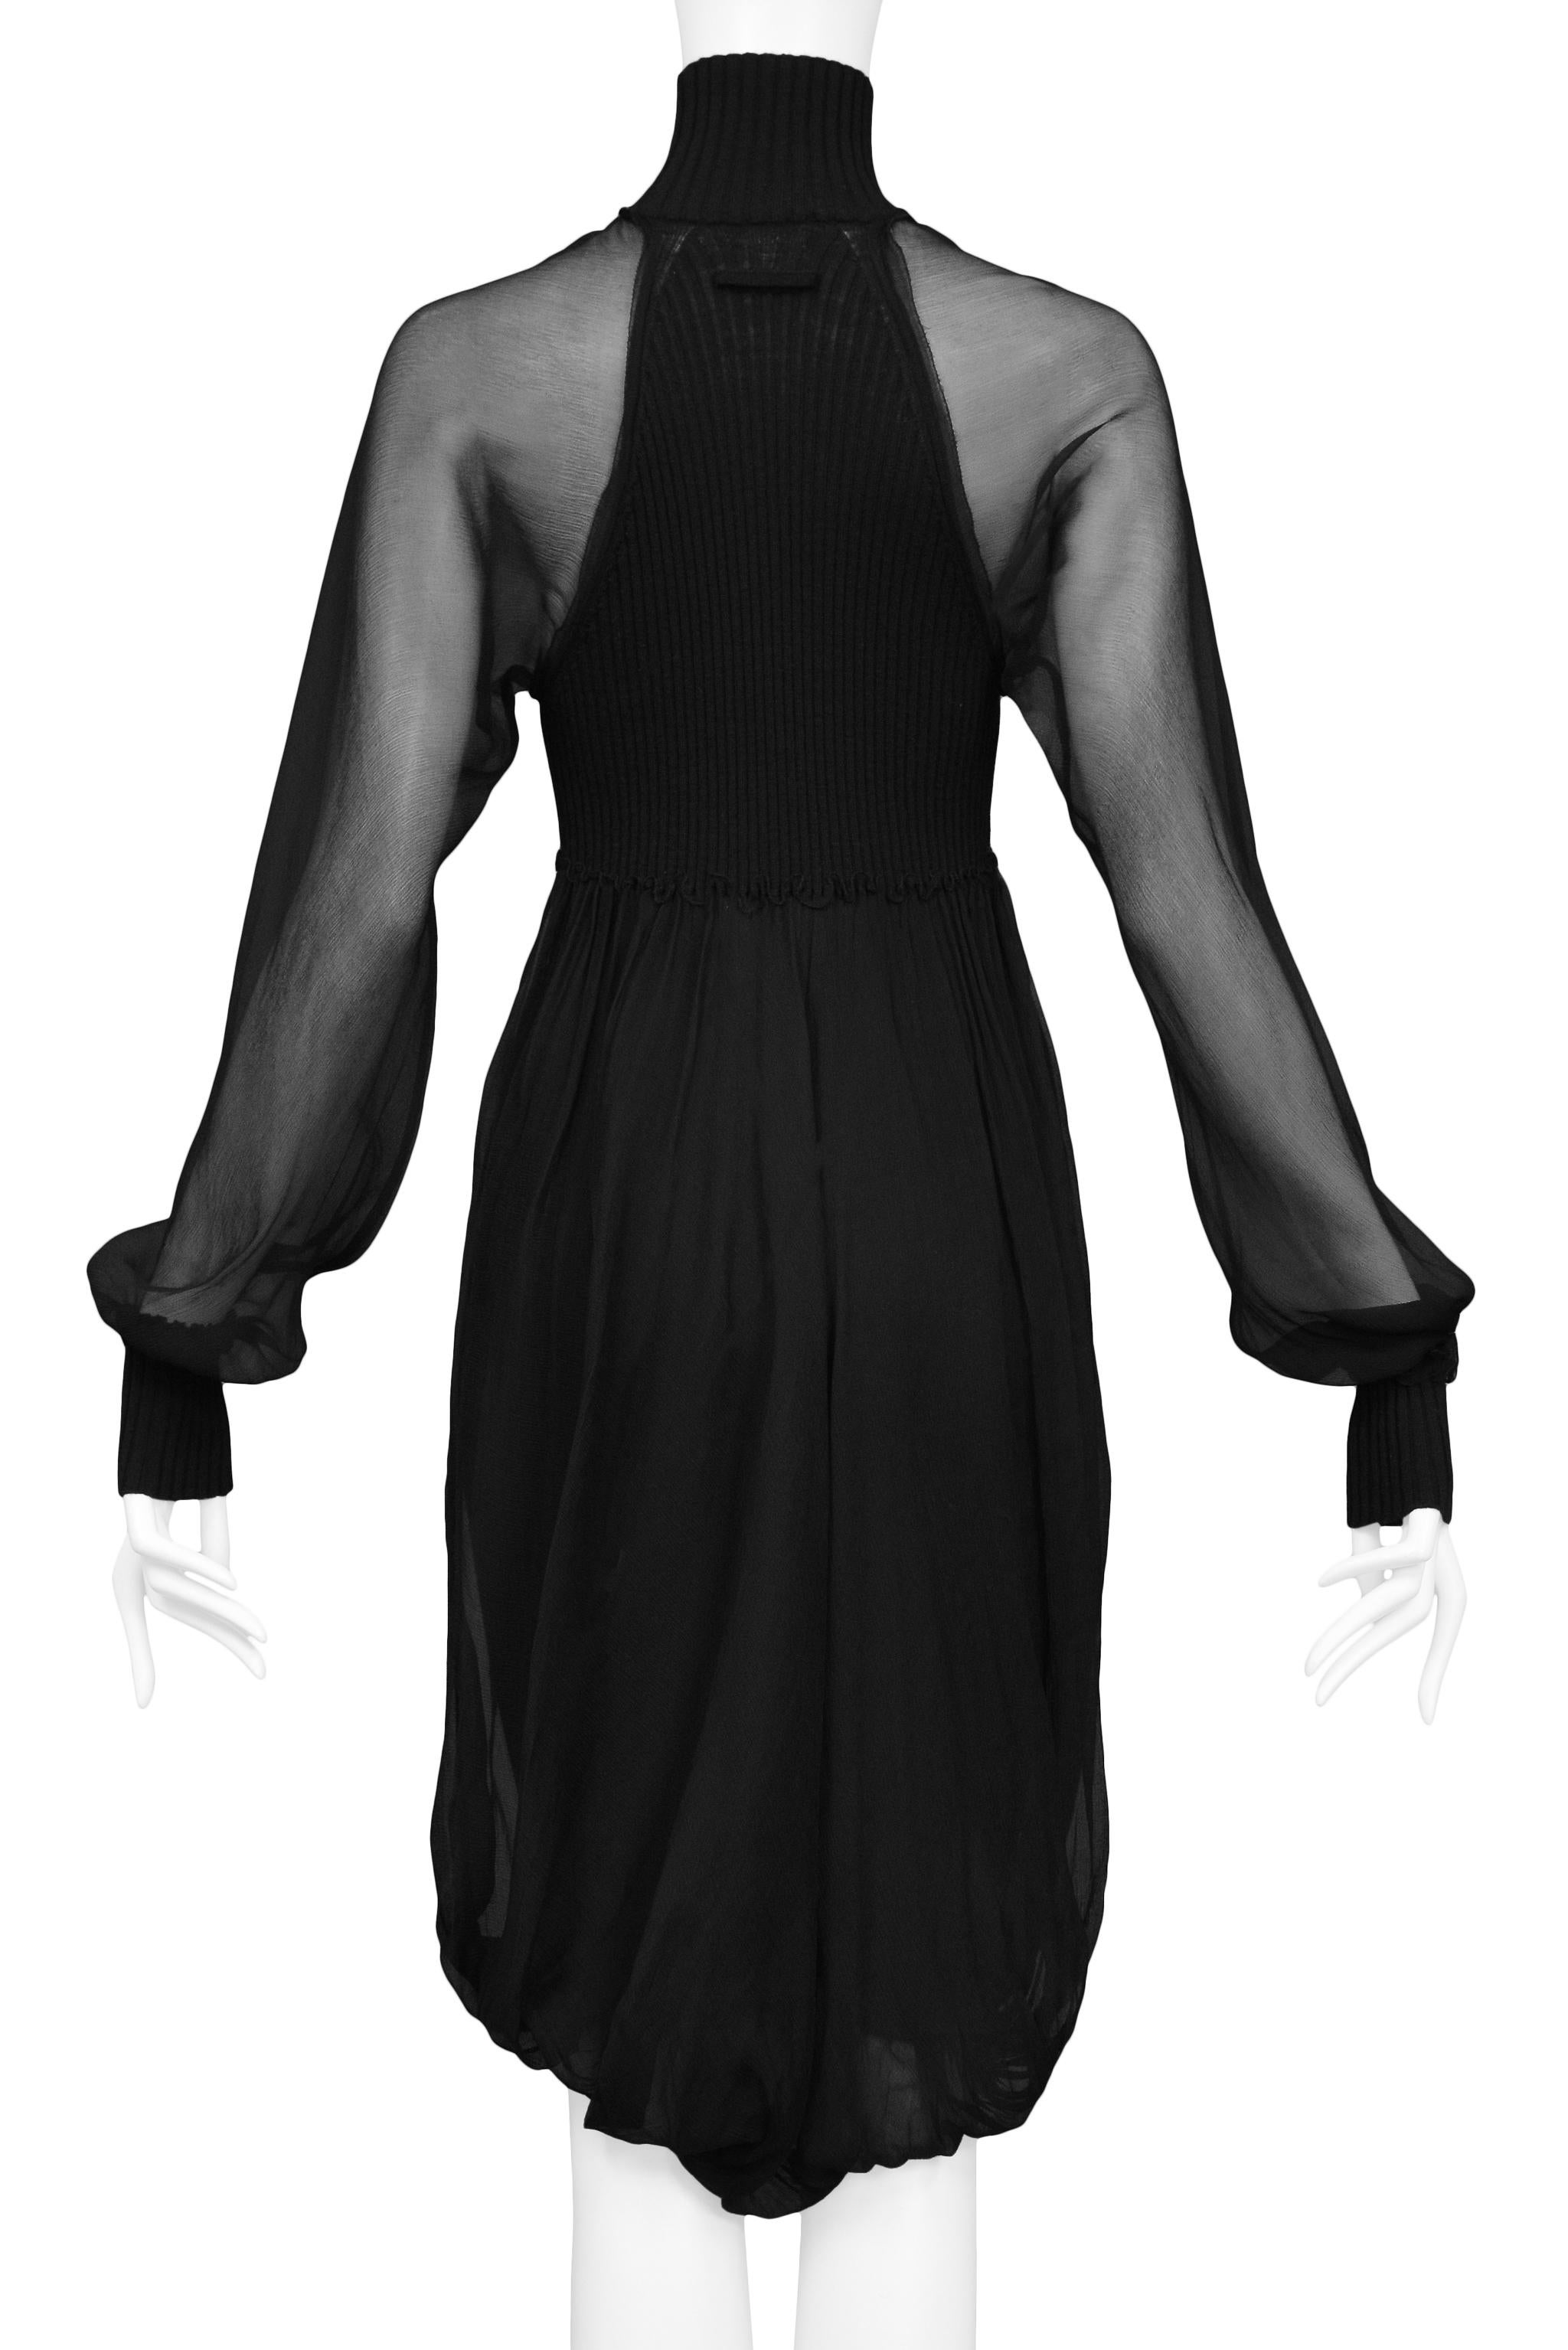 Jean Paul Gaultier Black Knit Illusion Dress With Chiffon Overlay & Sleeves In Excellent Condition For Sale In Los Angeles, CA